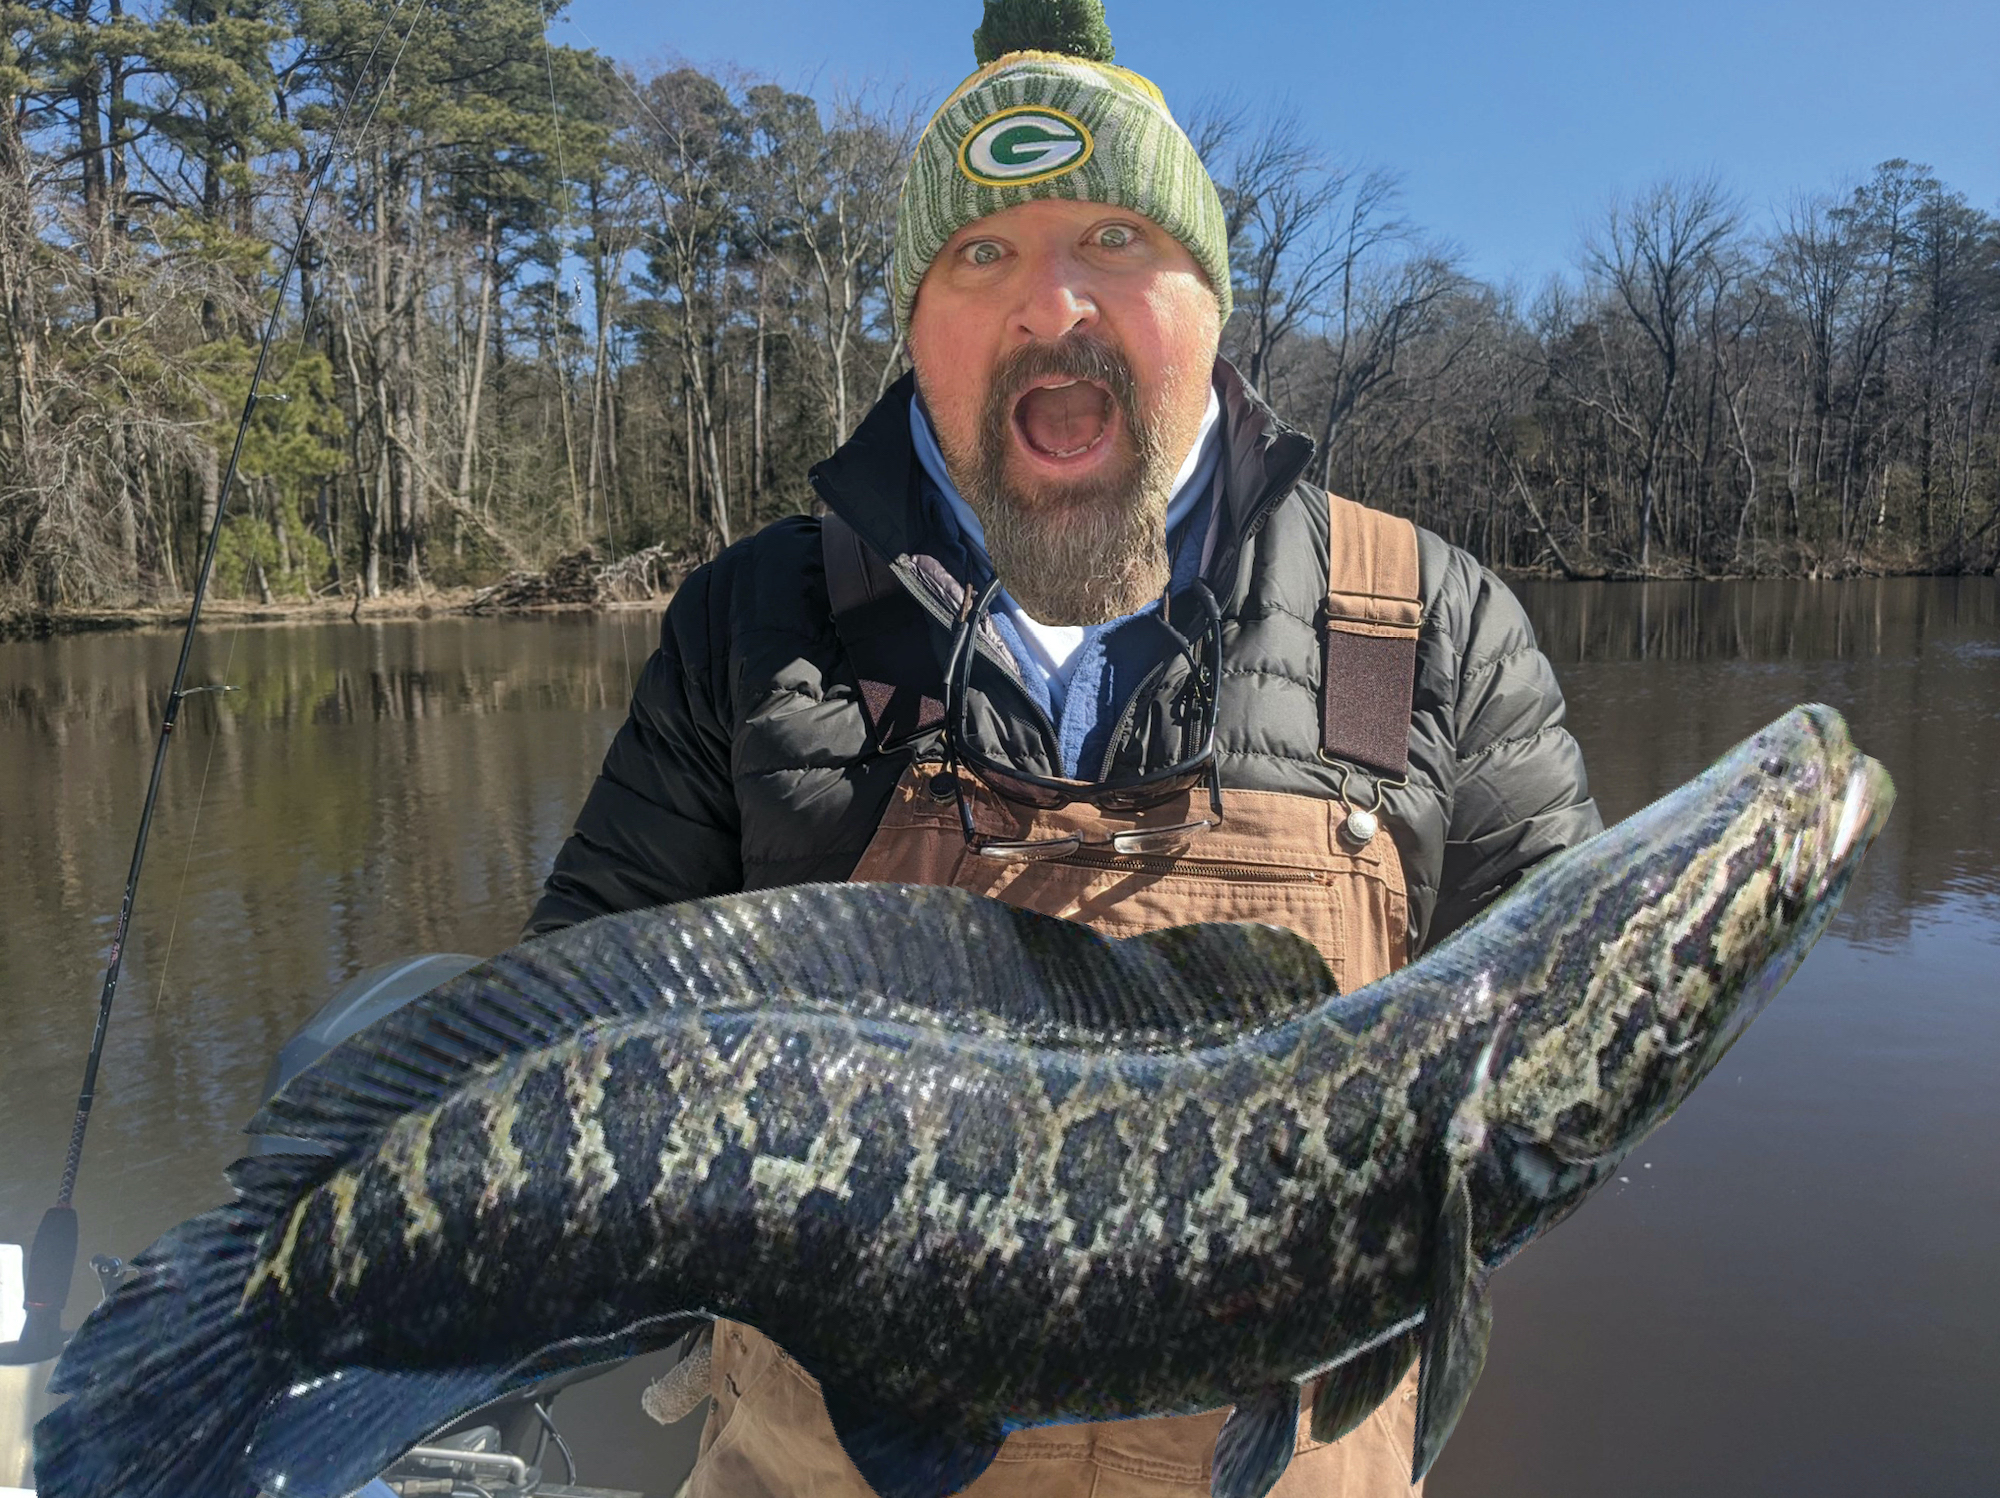 Potential New World Record Northern Snakehead Caught